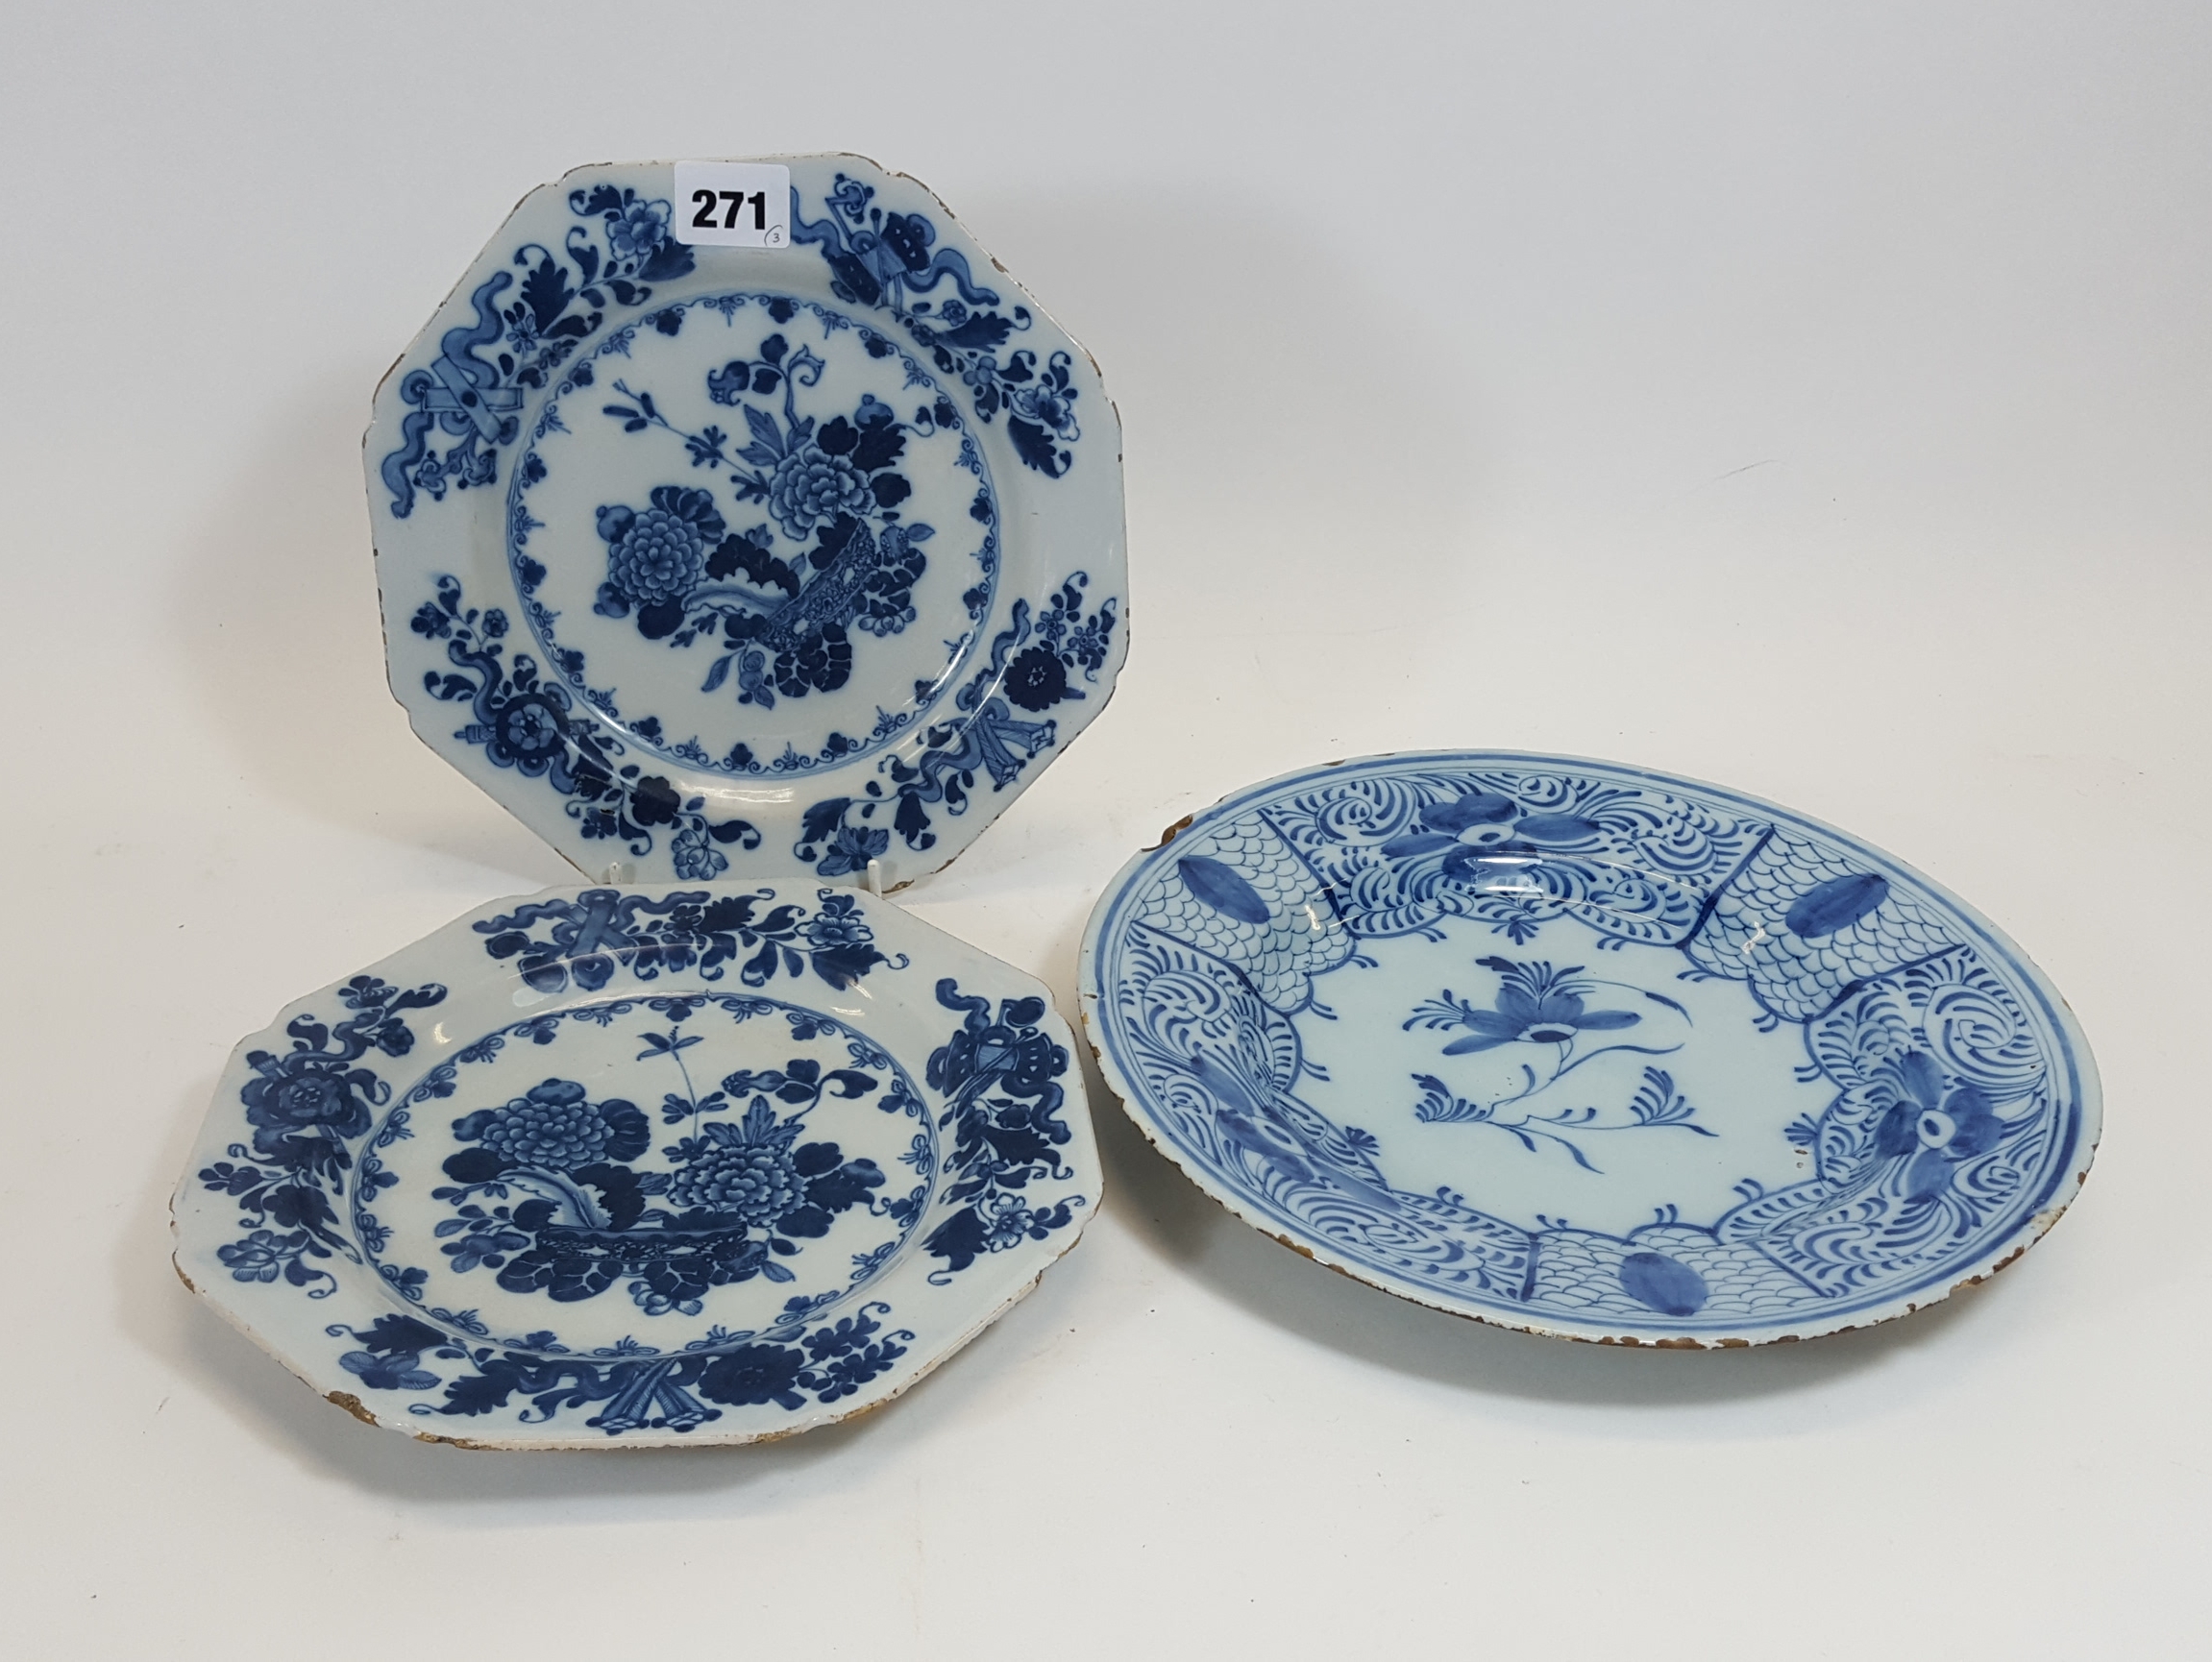 A PAIR OF 18TH CENTURY ENGLISH BLUE AND WHITE OCTAGONAL TIN-GLAZED DELFT PLATES decorated in the